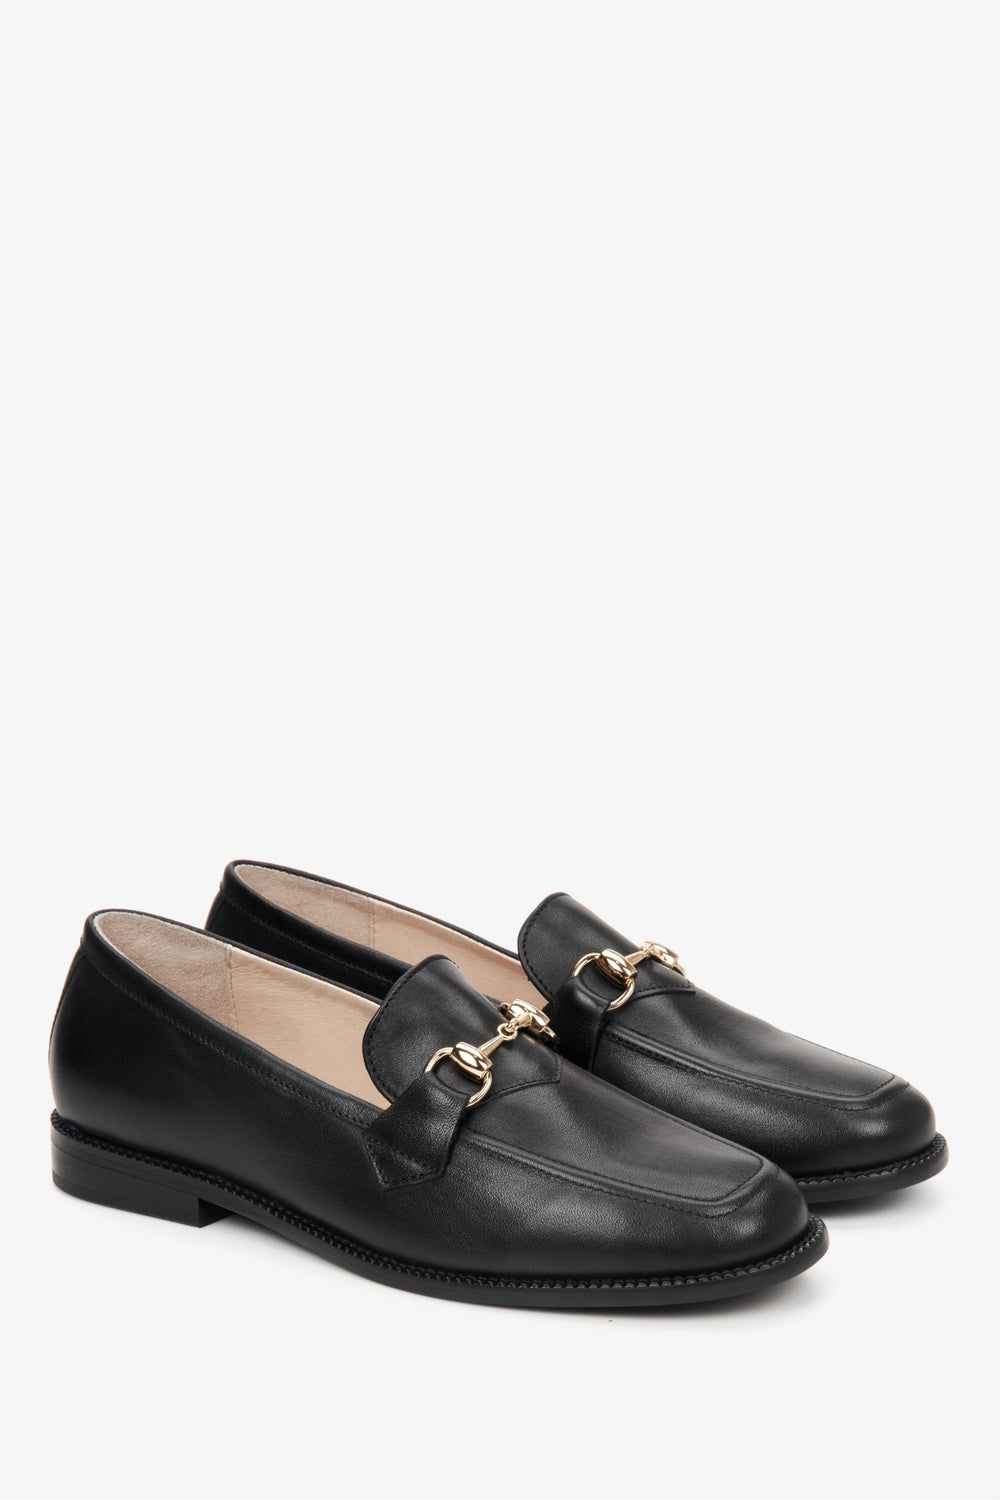 Italian leather black women's loafers with gold buckle Estro - shoe side.